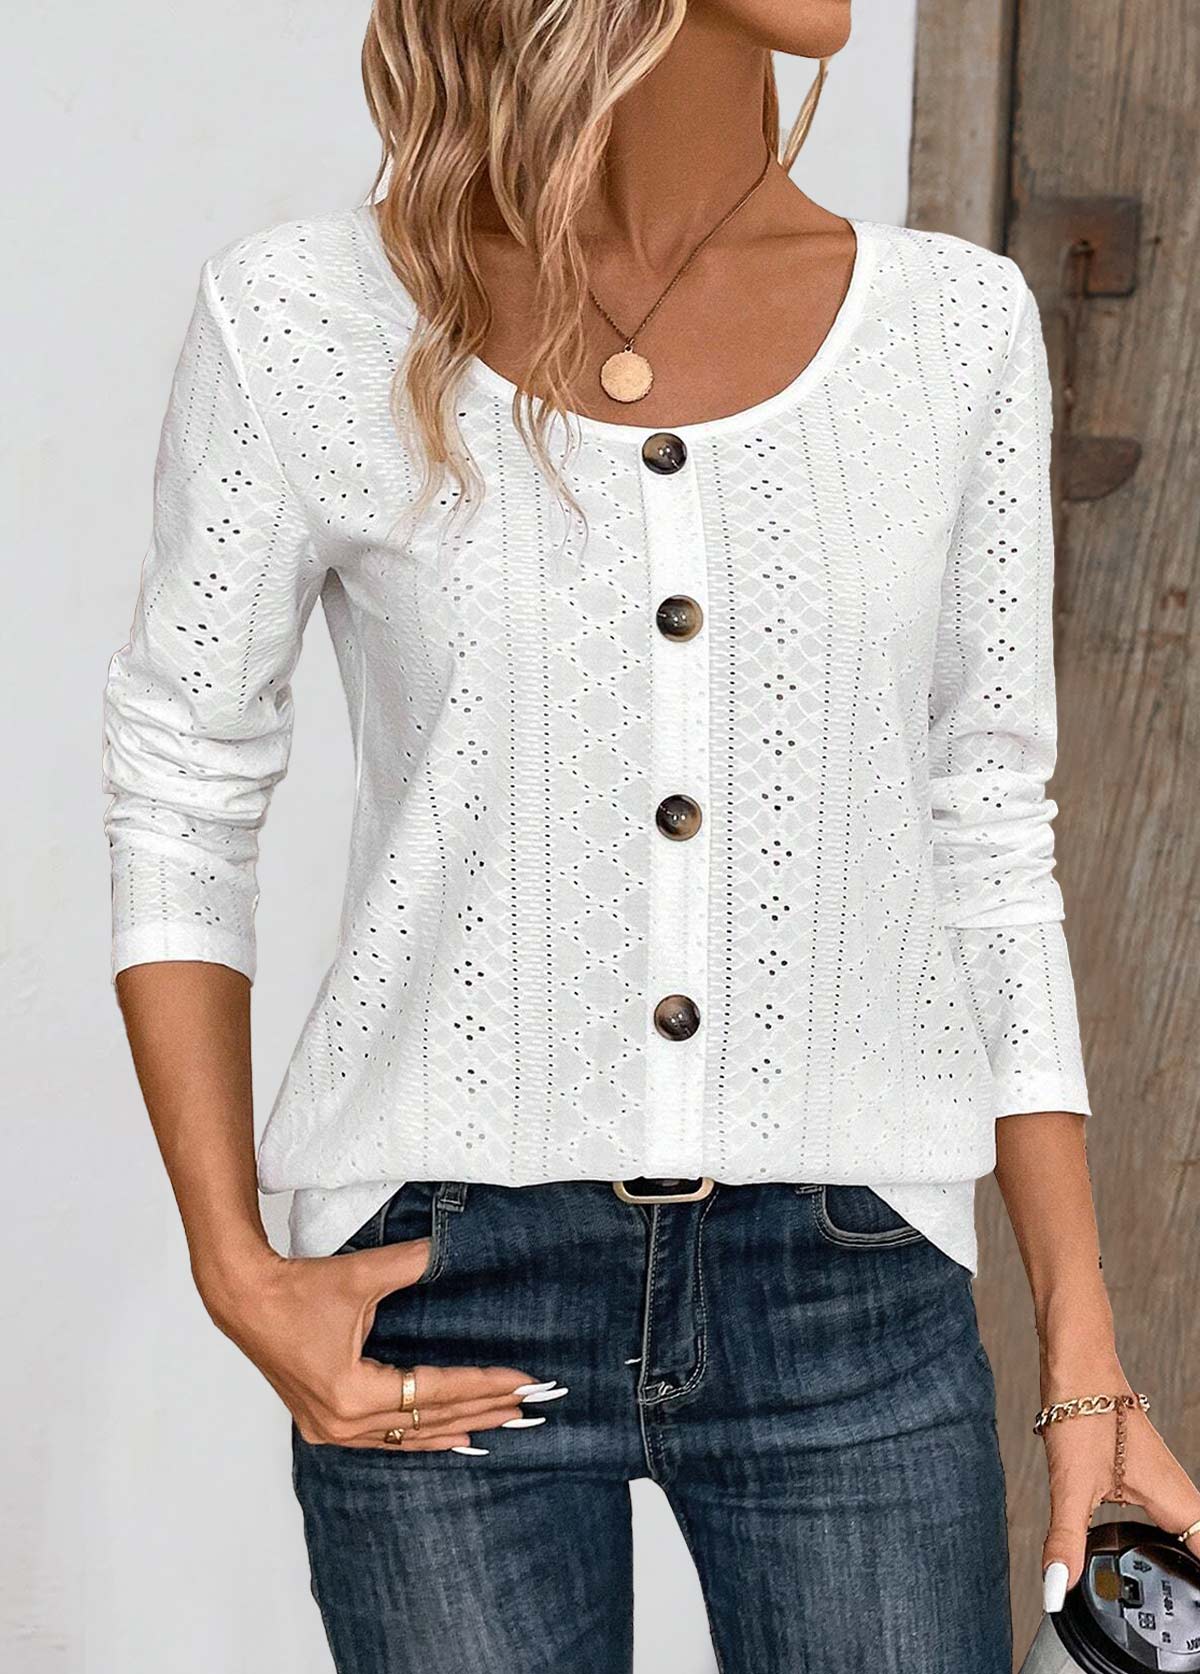 White Button Long Sleeve Round Neck T Shirt